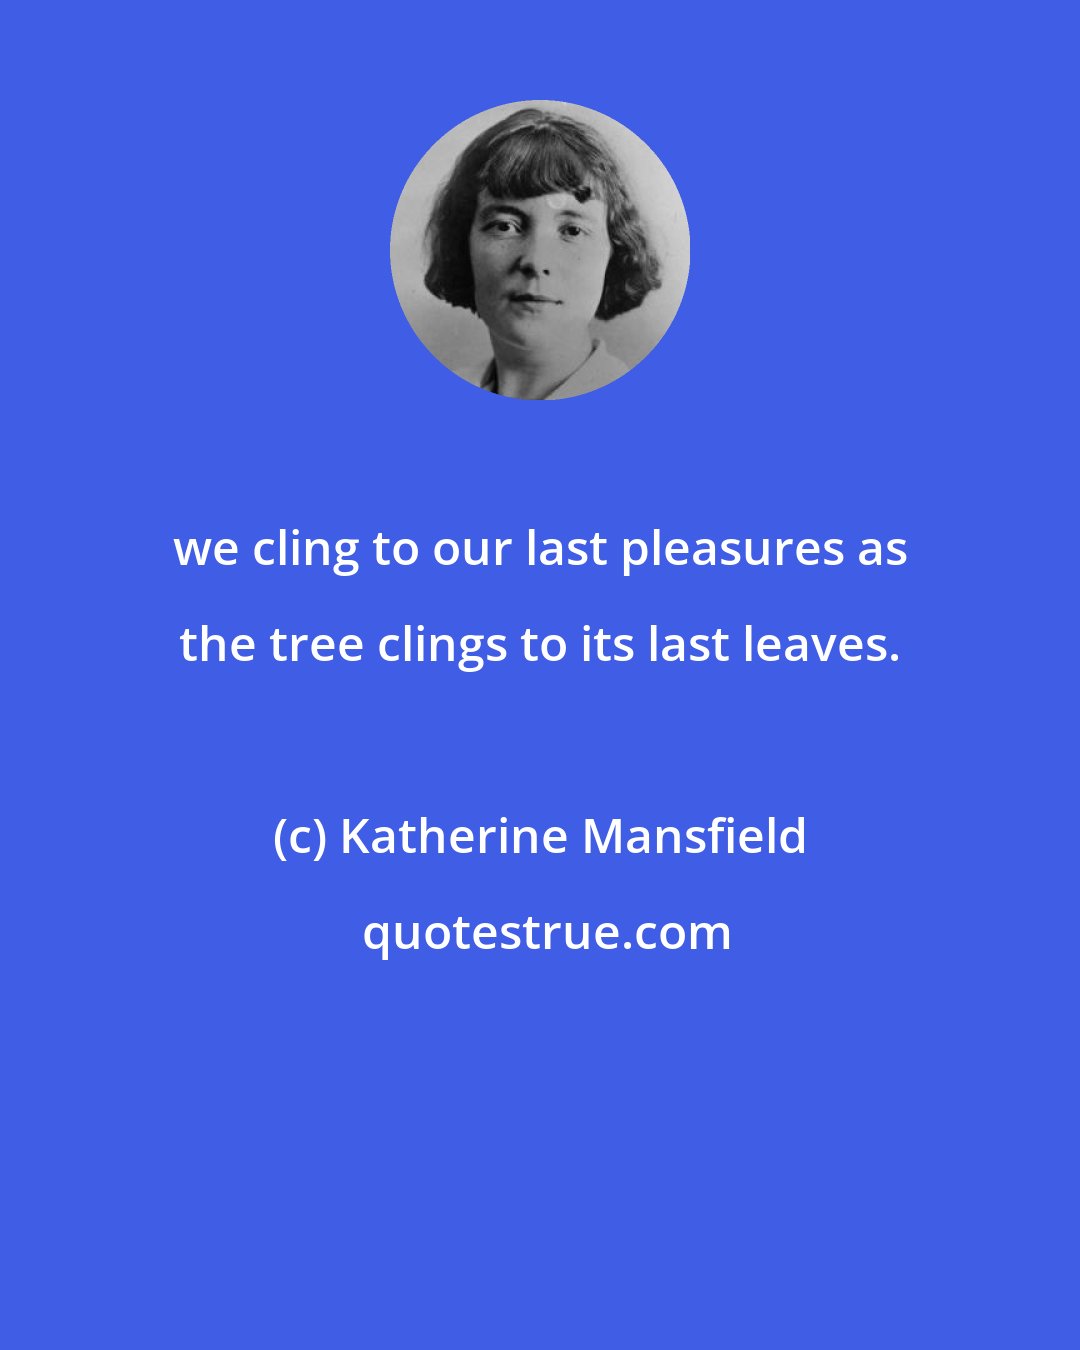 Katherine Mansfield: we cling to our last pleasures as the tree clings to its last leaves.